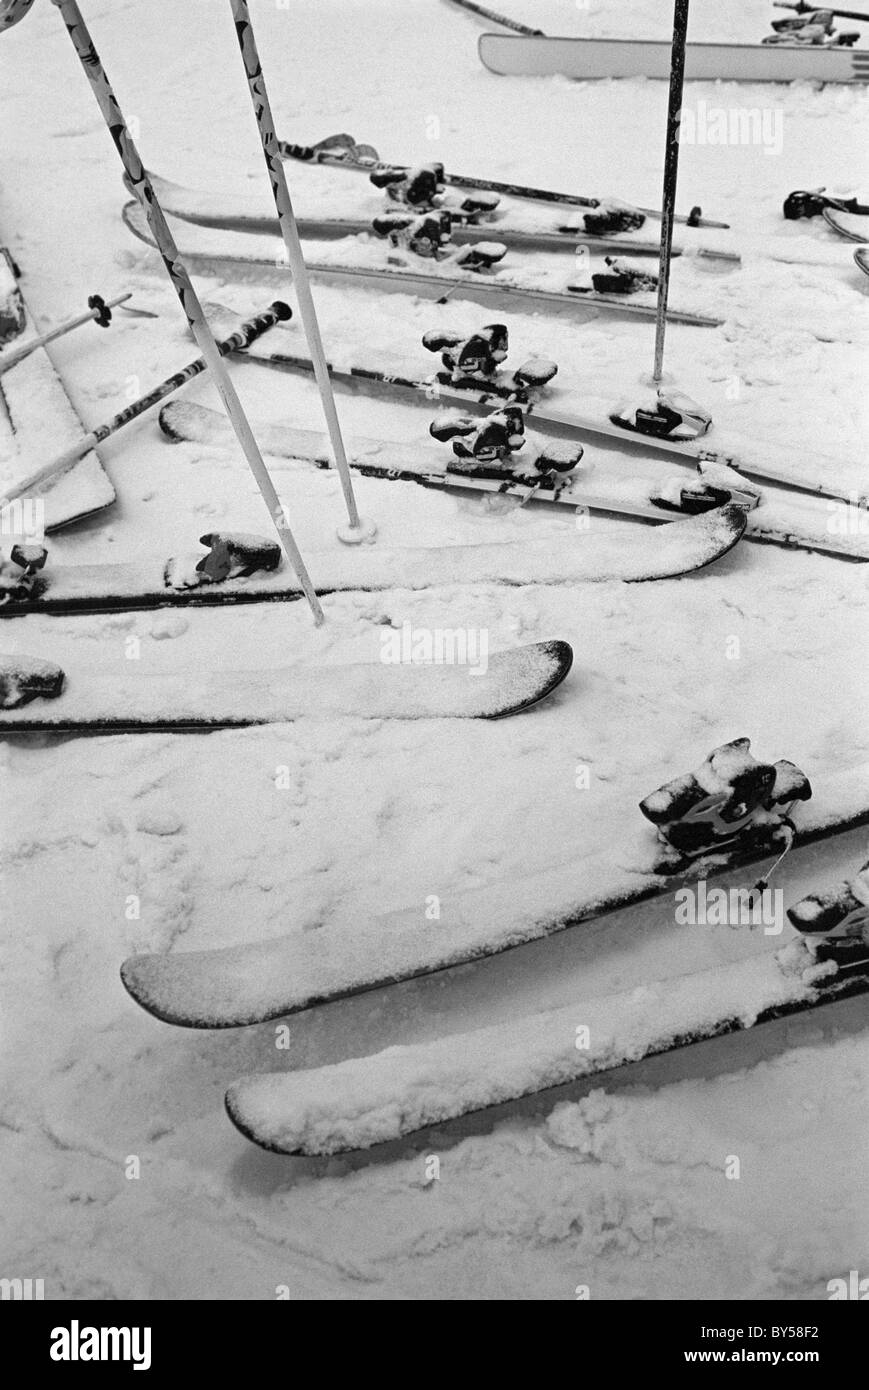 Skis and ski poles in the snow Stock Photo